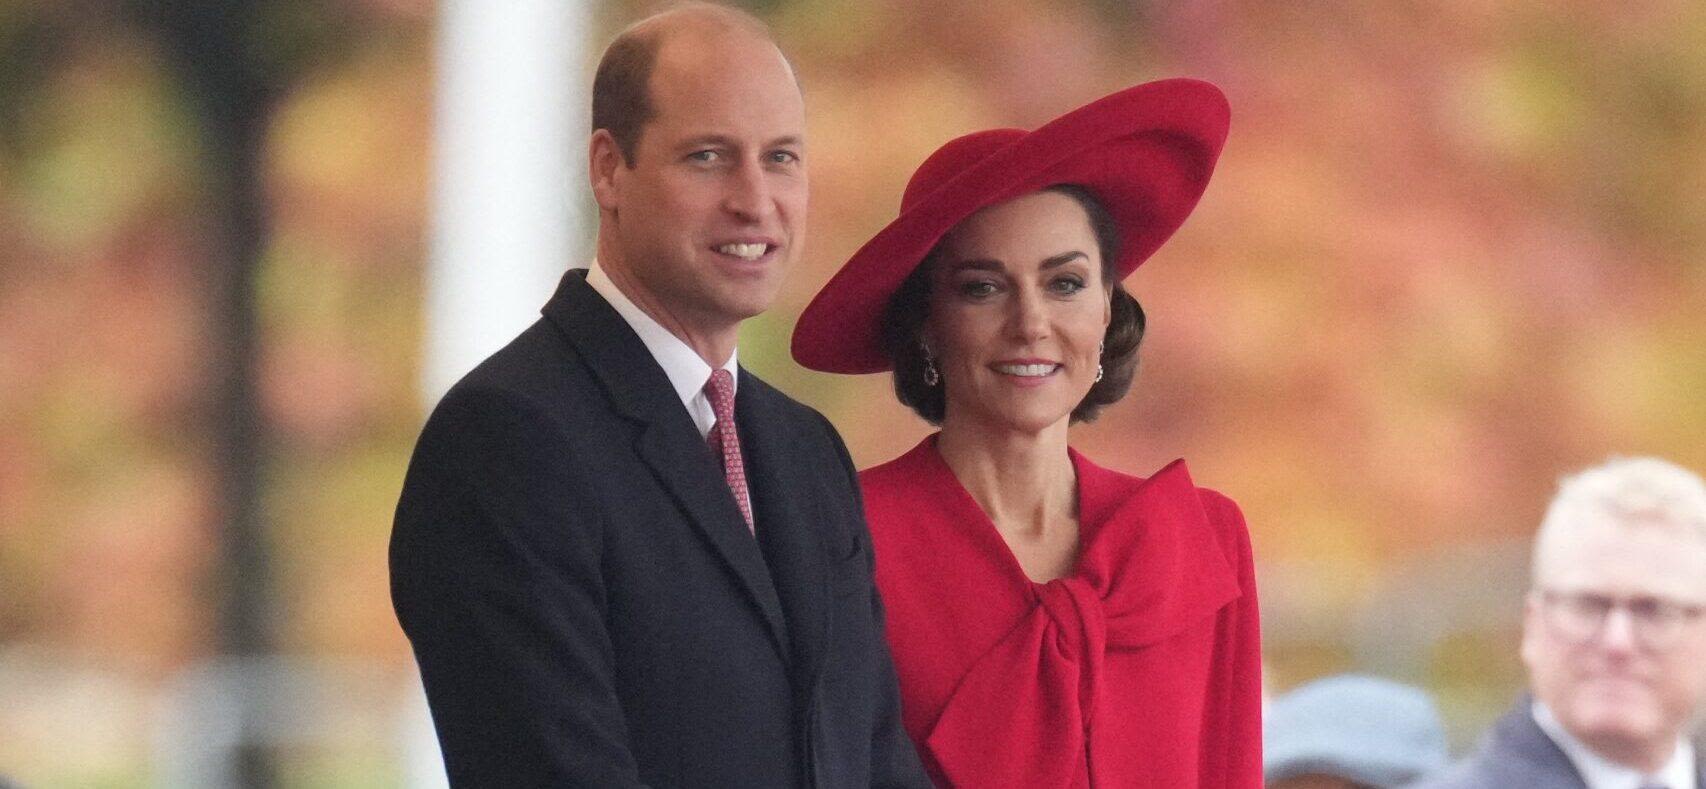 How Kate Middleton In A 'Nurse Uniform' Won Back Prince William After He Initially Dumped Her